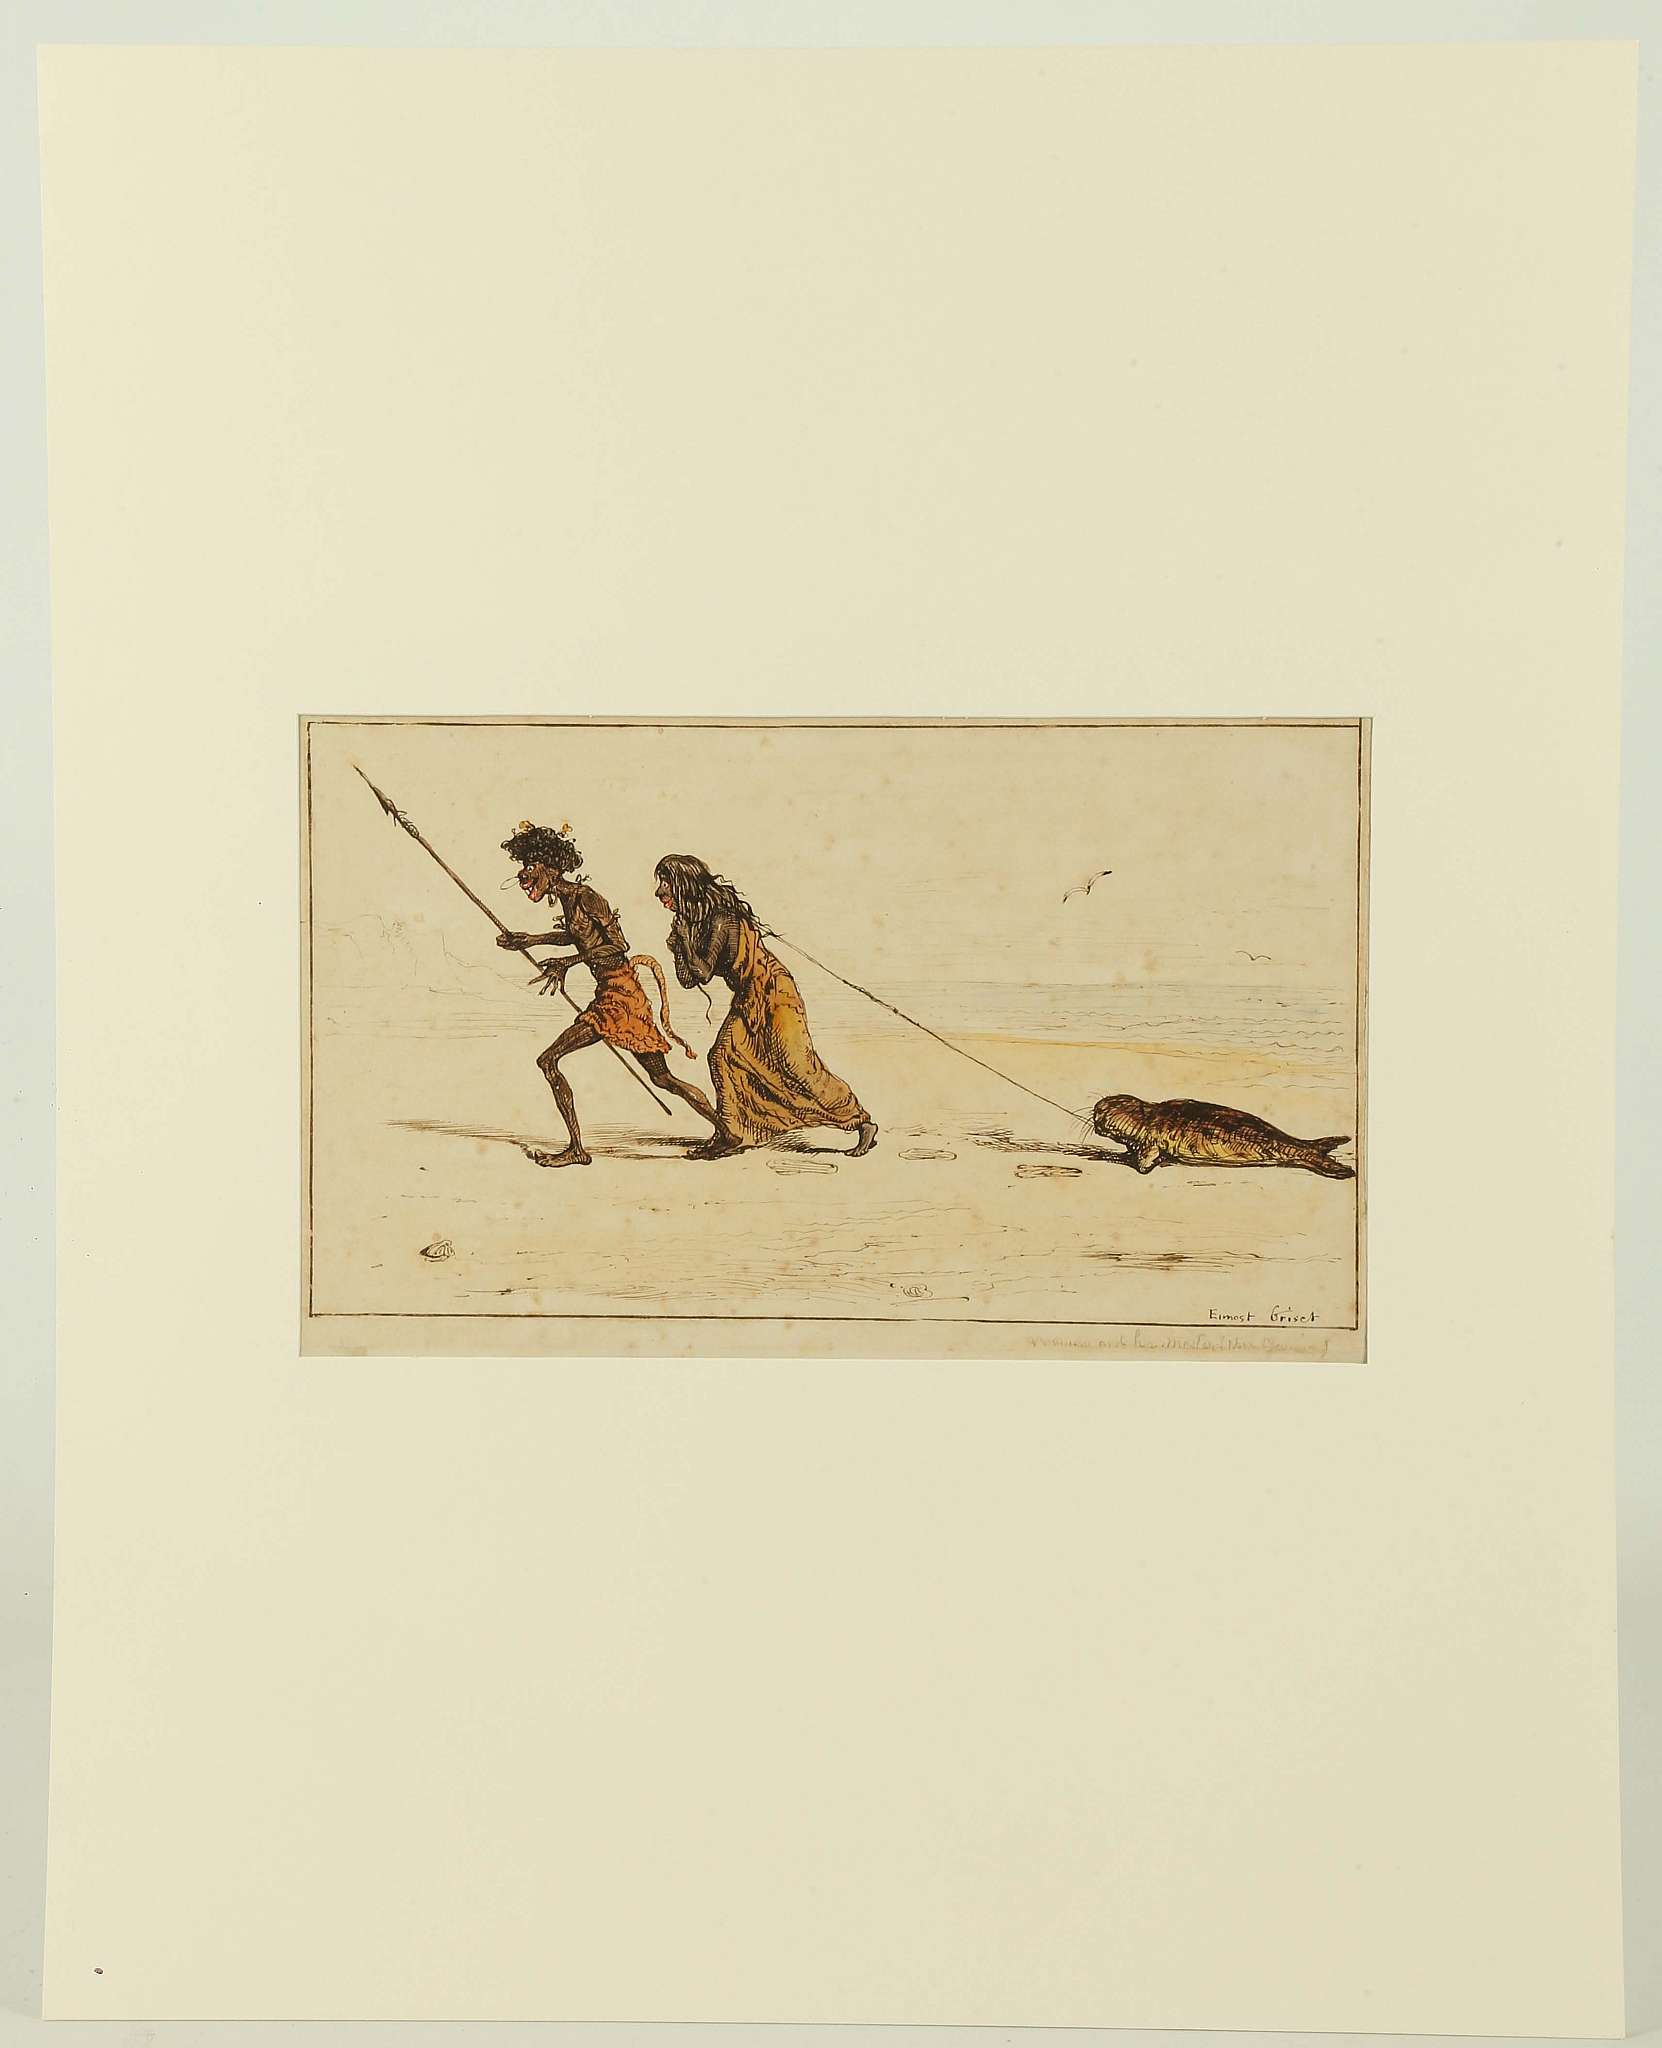 ERNEST HENRY GRISET 1844-1907 FRANCE. 'Figures on a beach dragging a Seal'. Pen and ink with wash - Image 4 of 7